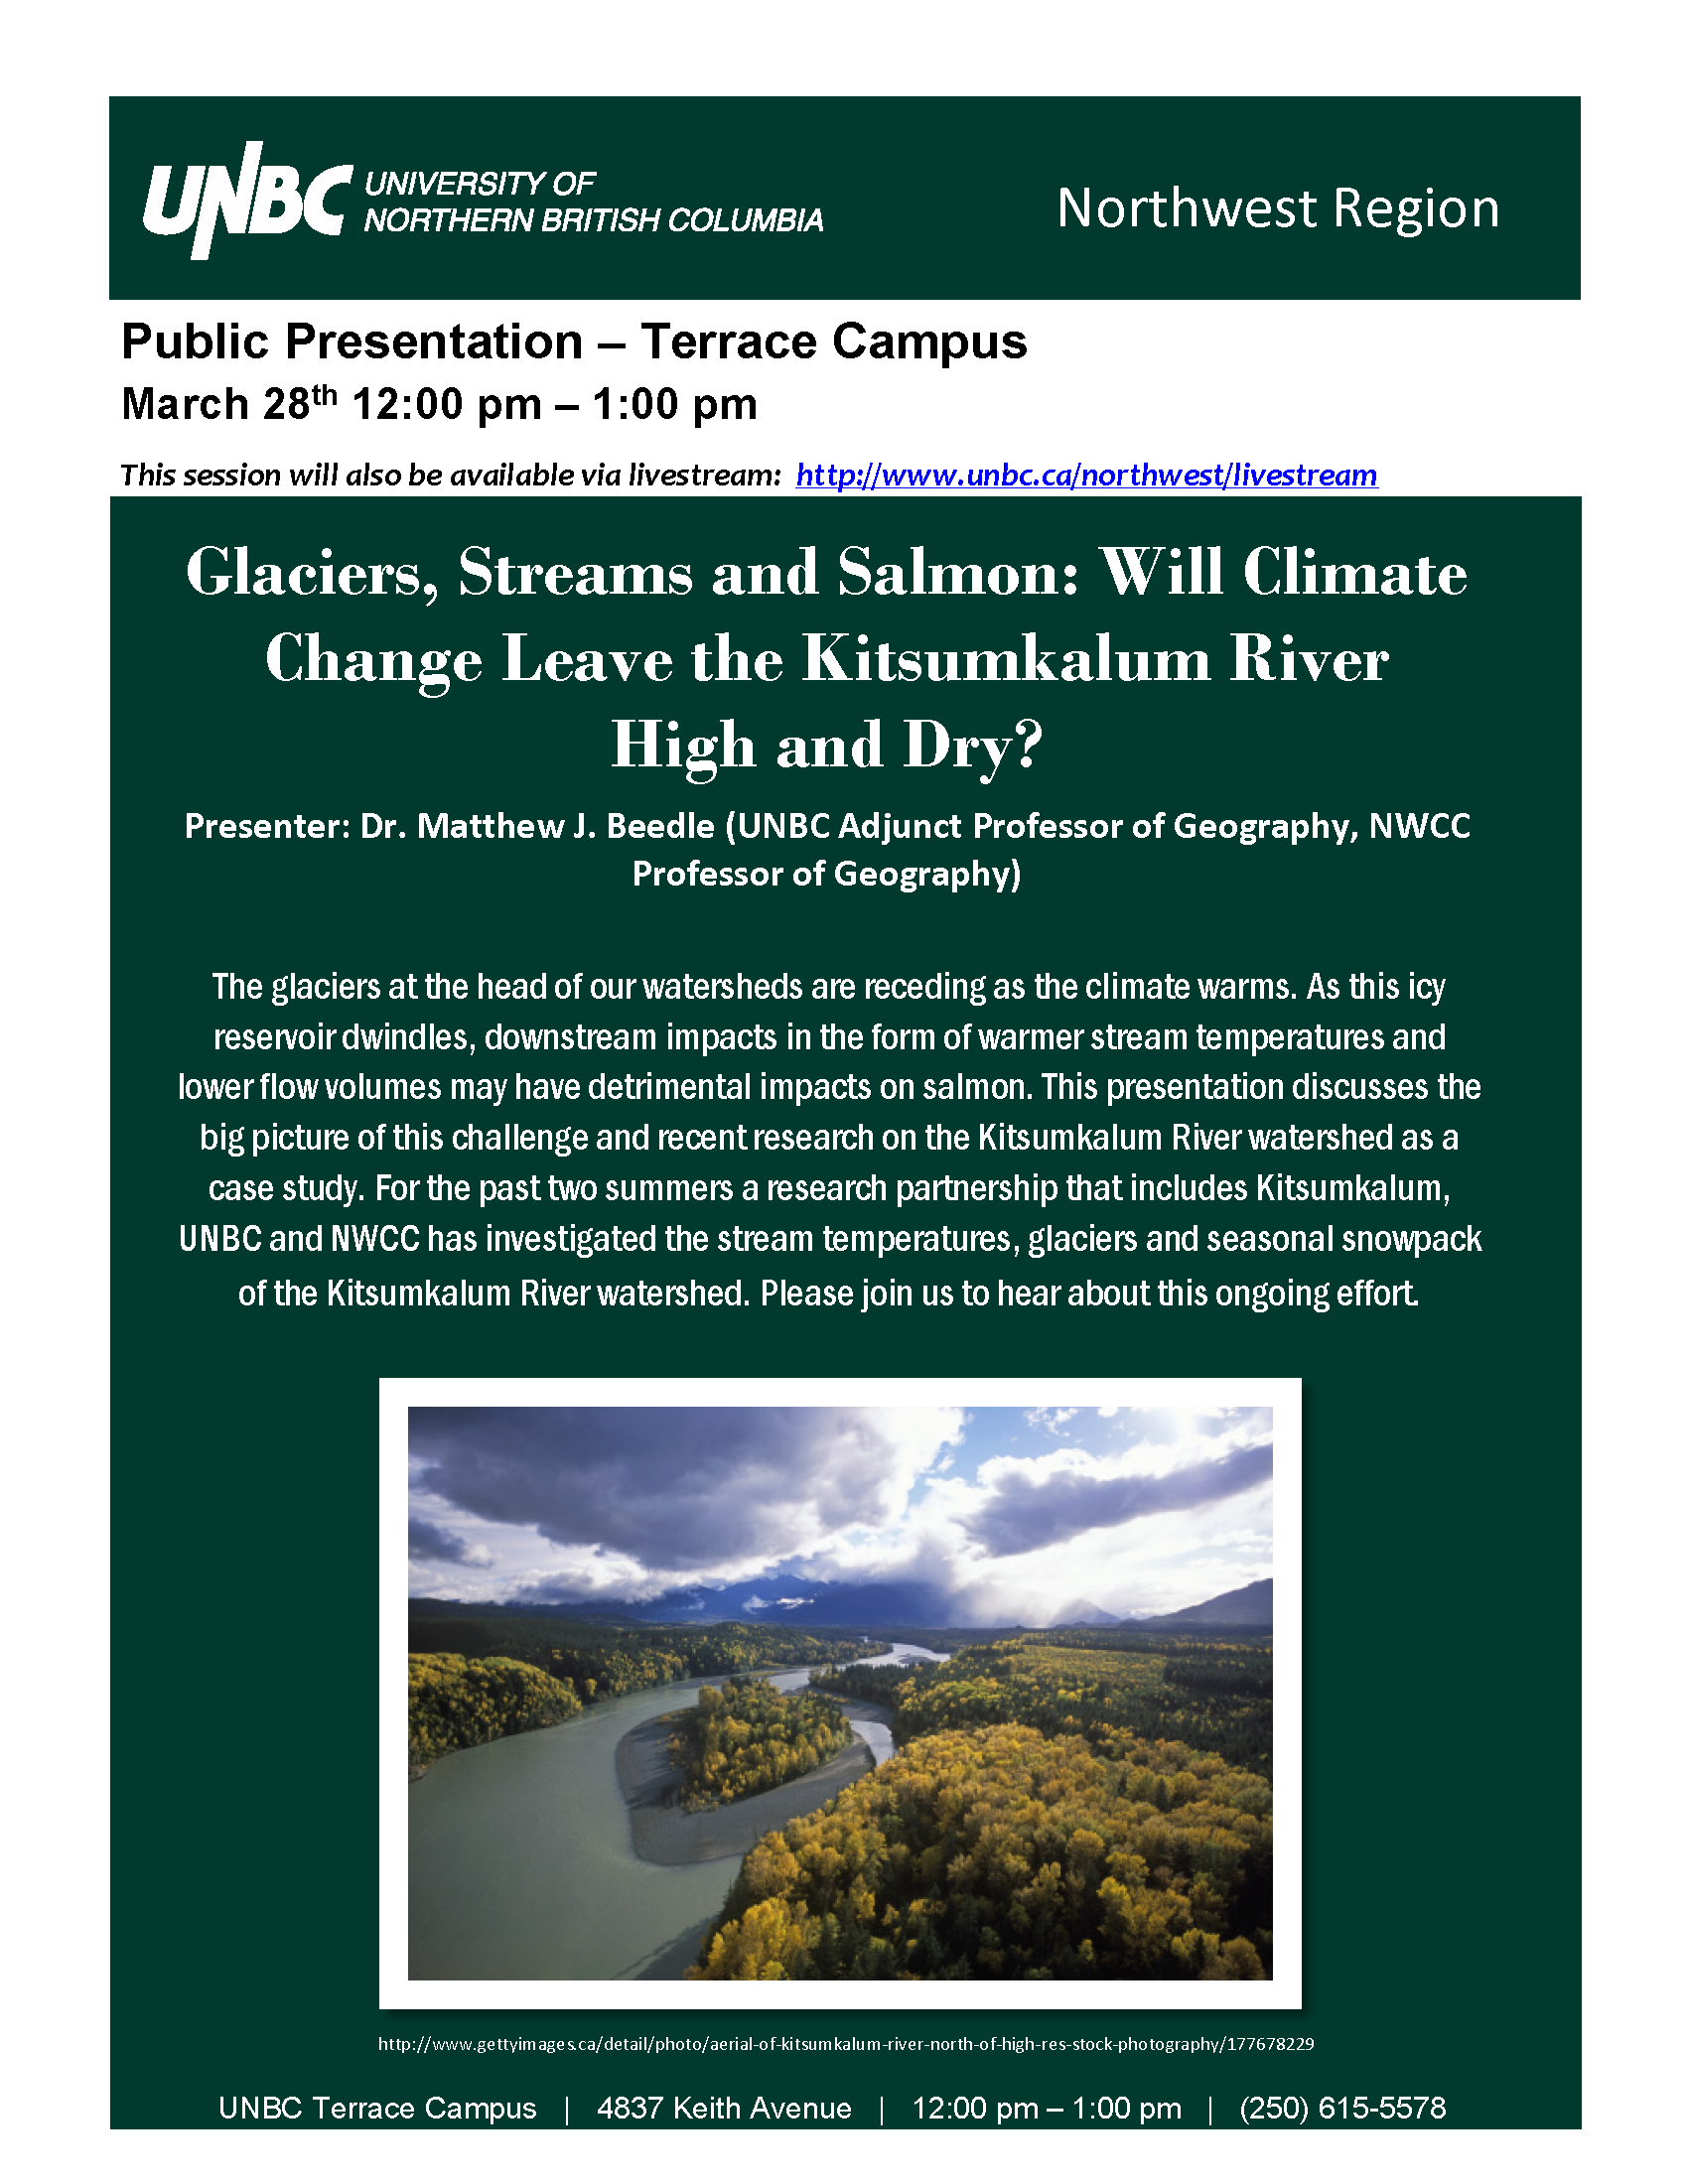 Matthew Beedle - Glaciers, Streams and Salmon: Will Climate Change Leave the Kitsumkalum River High and Dry?